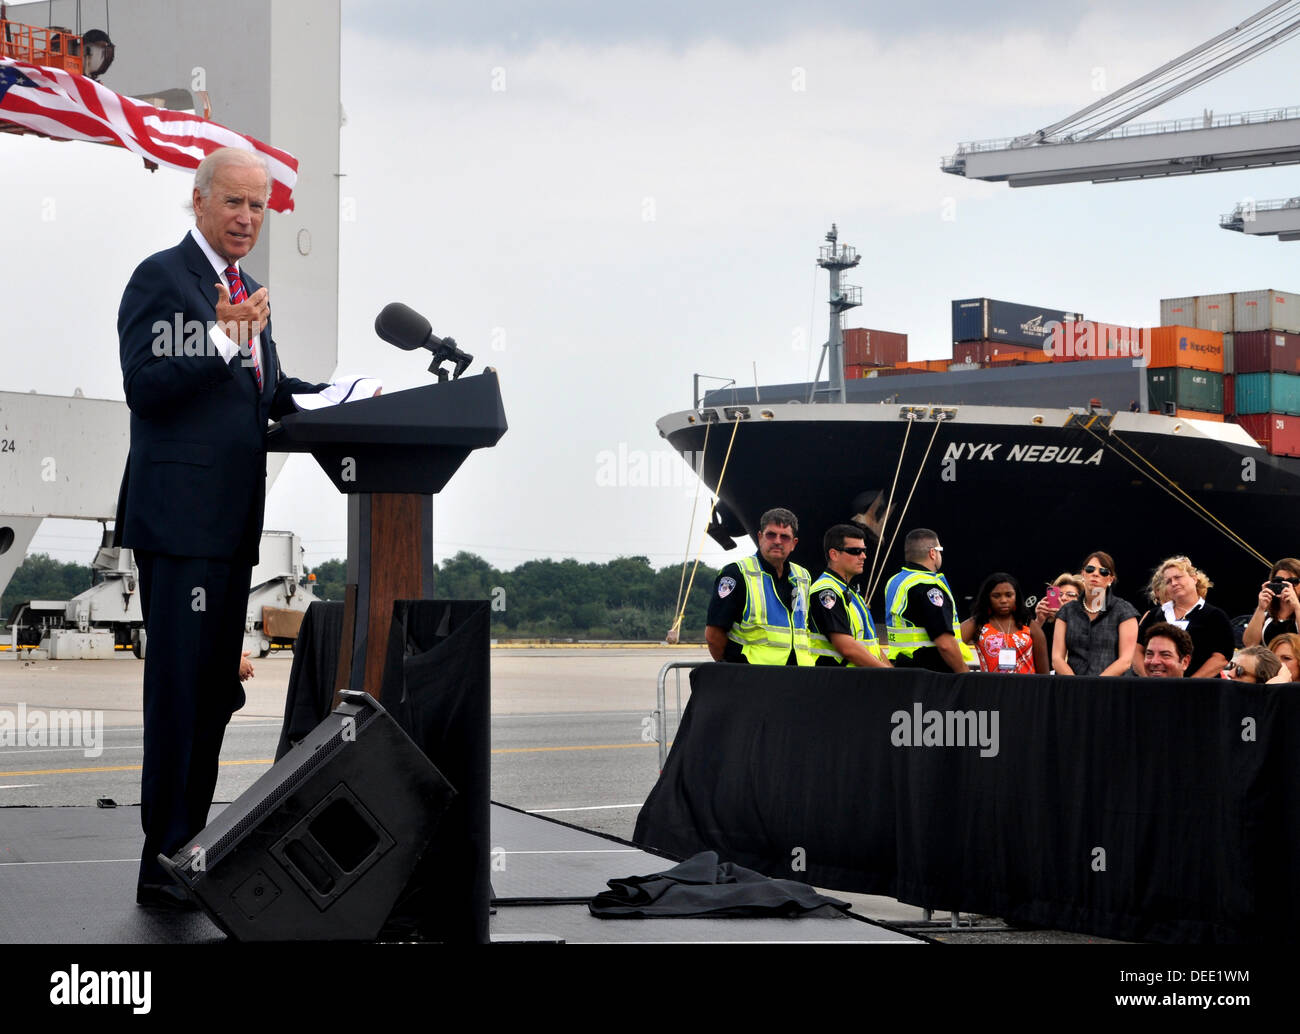 US Vice President Joe Biden gives a speech at the Georgia Ports Authority's Garden City Ocean Terminal September 16, 2013 in Savannah, GA. Biden spoke about the importance of infrastructure investment to exports, economic competitiveness, and job creation. Stock Photo